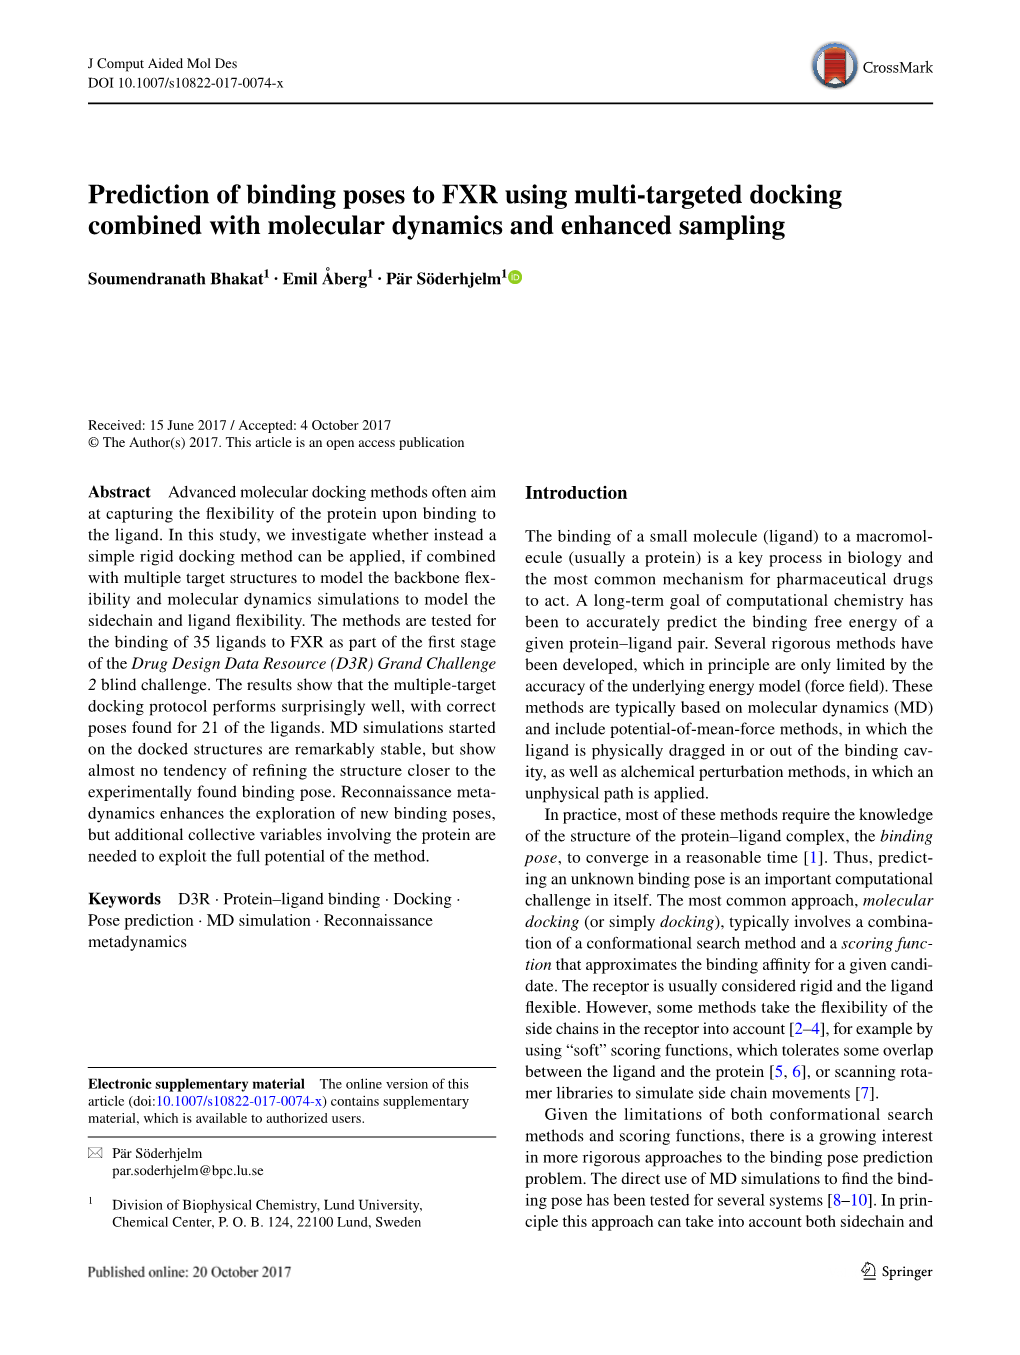 Prediction of Binding Poses to FXR Using Multi-Targeted Docking